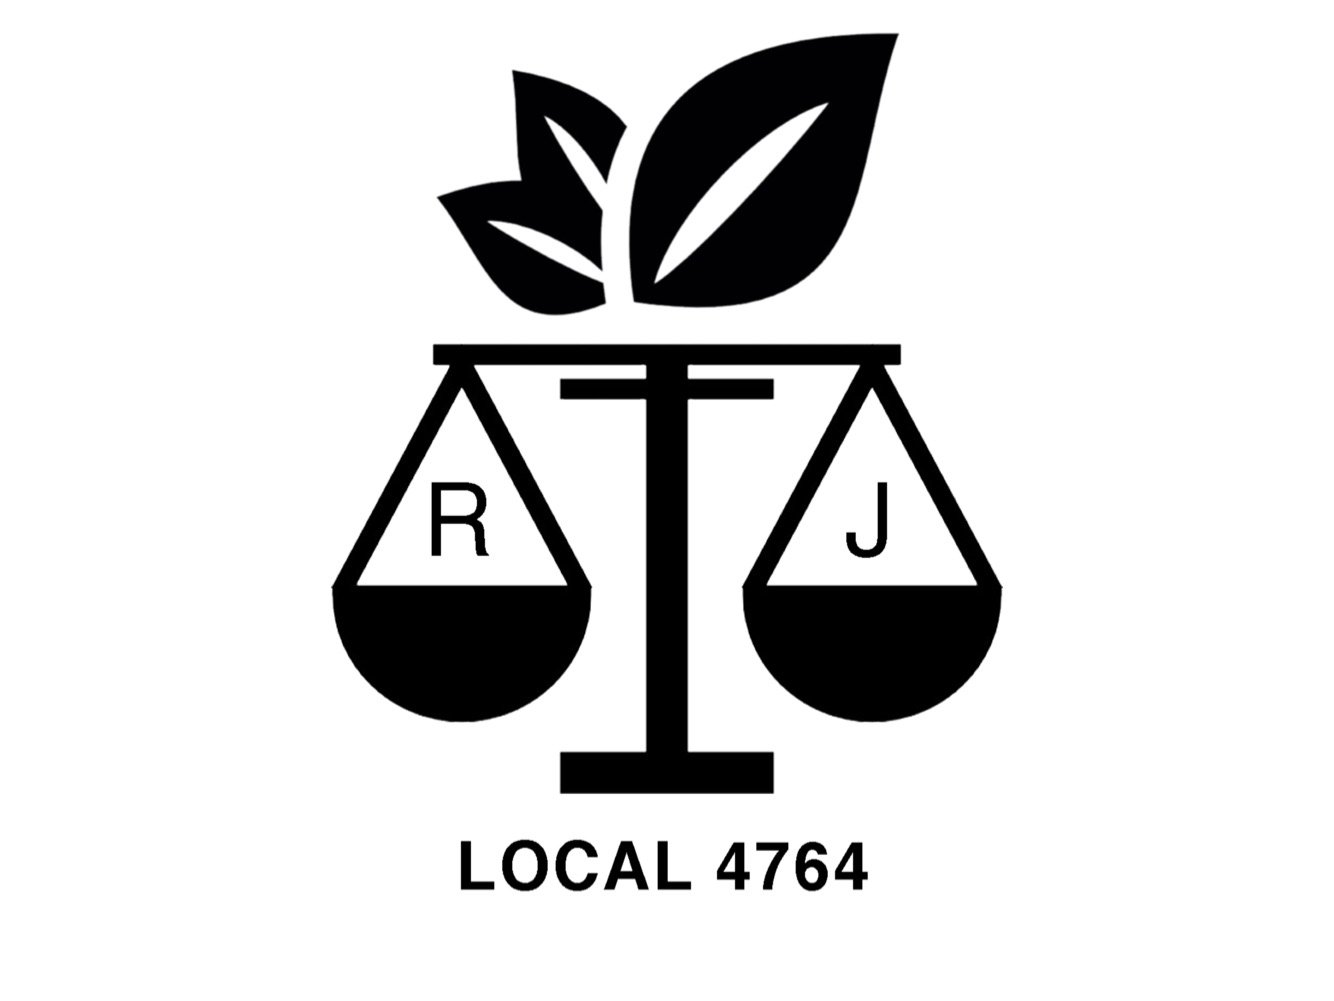 CUPE Local 4764. We are the caseworkers of the Community Justice Society. CJS administers the Restorative Justice Program for the Department of Justice.